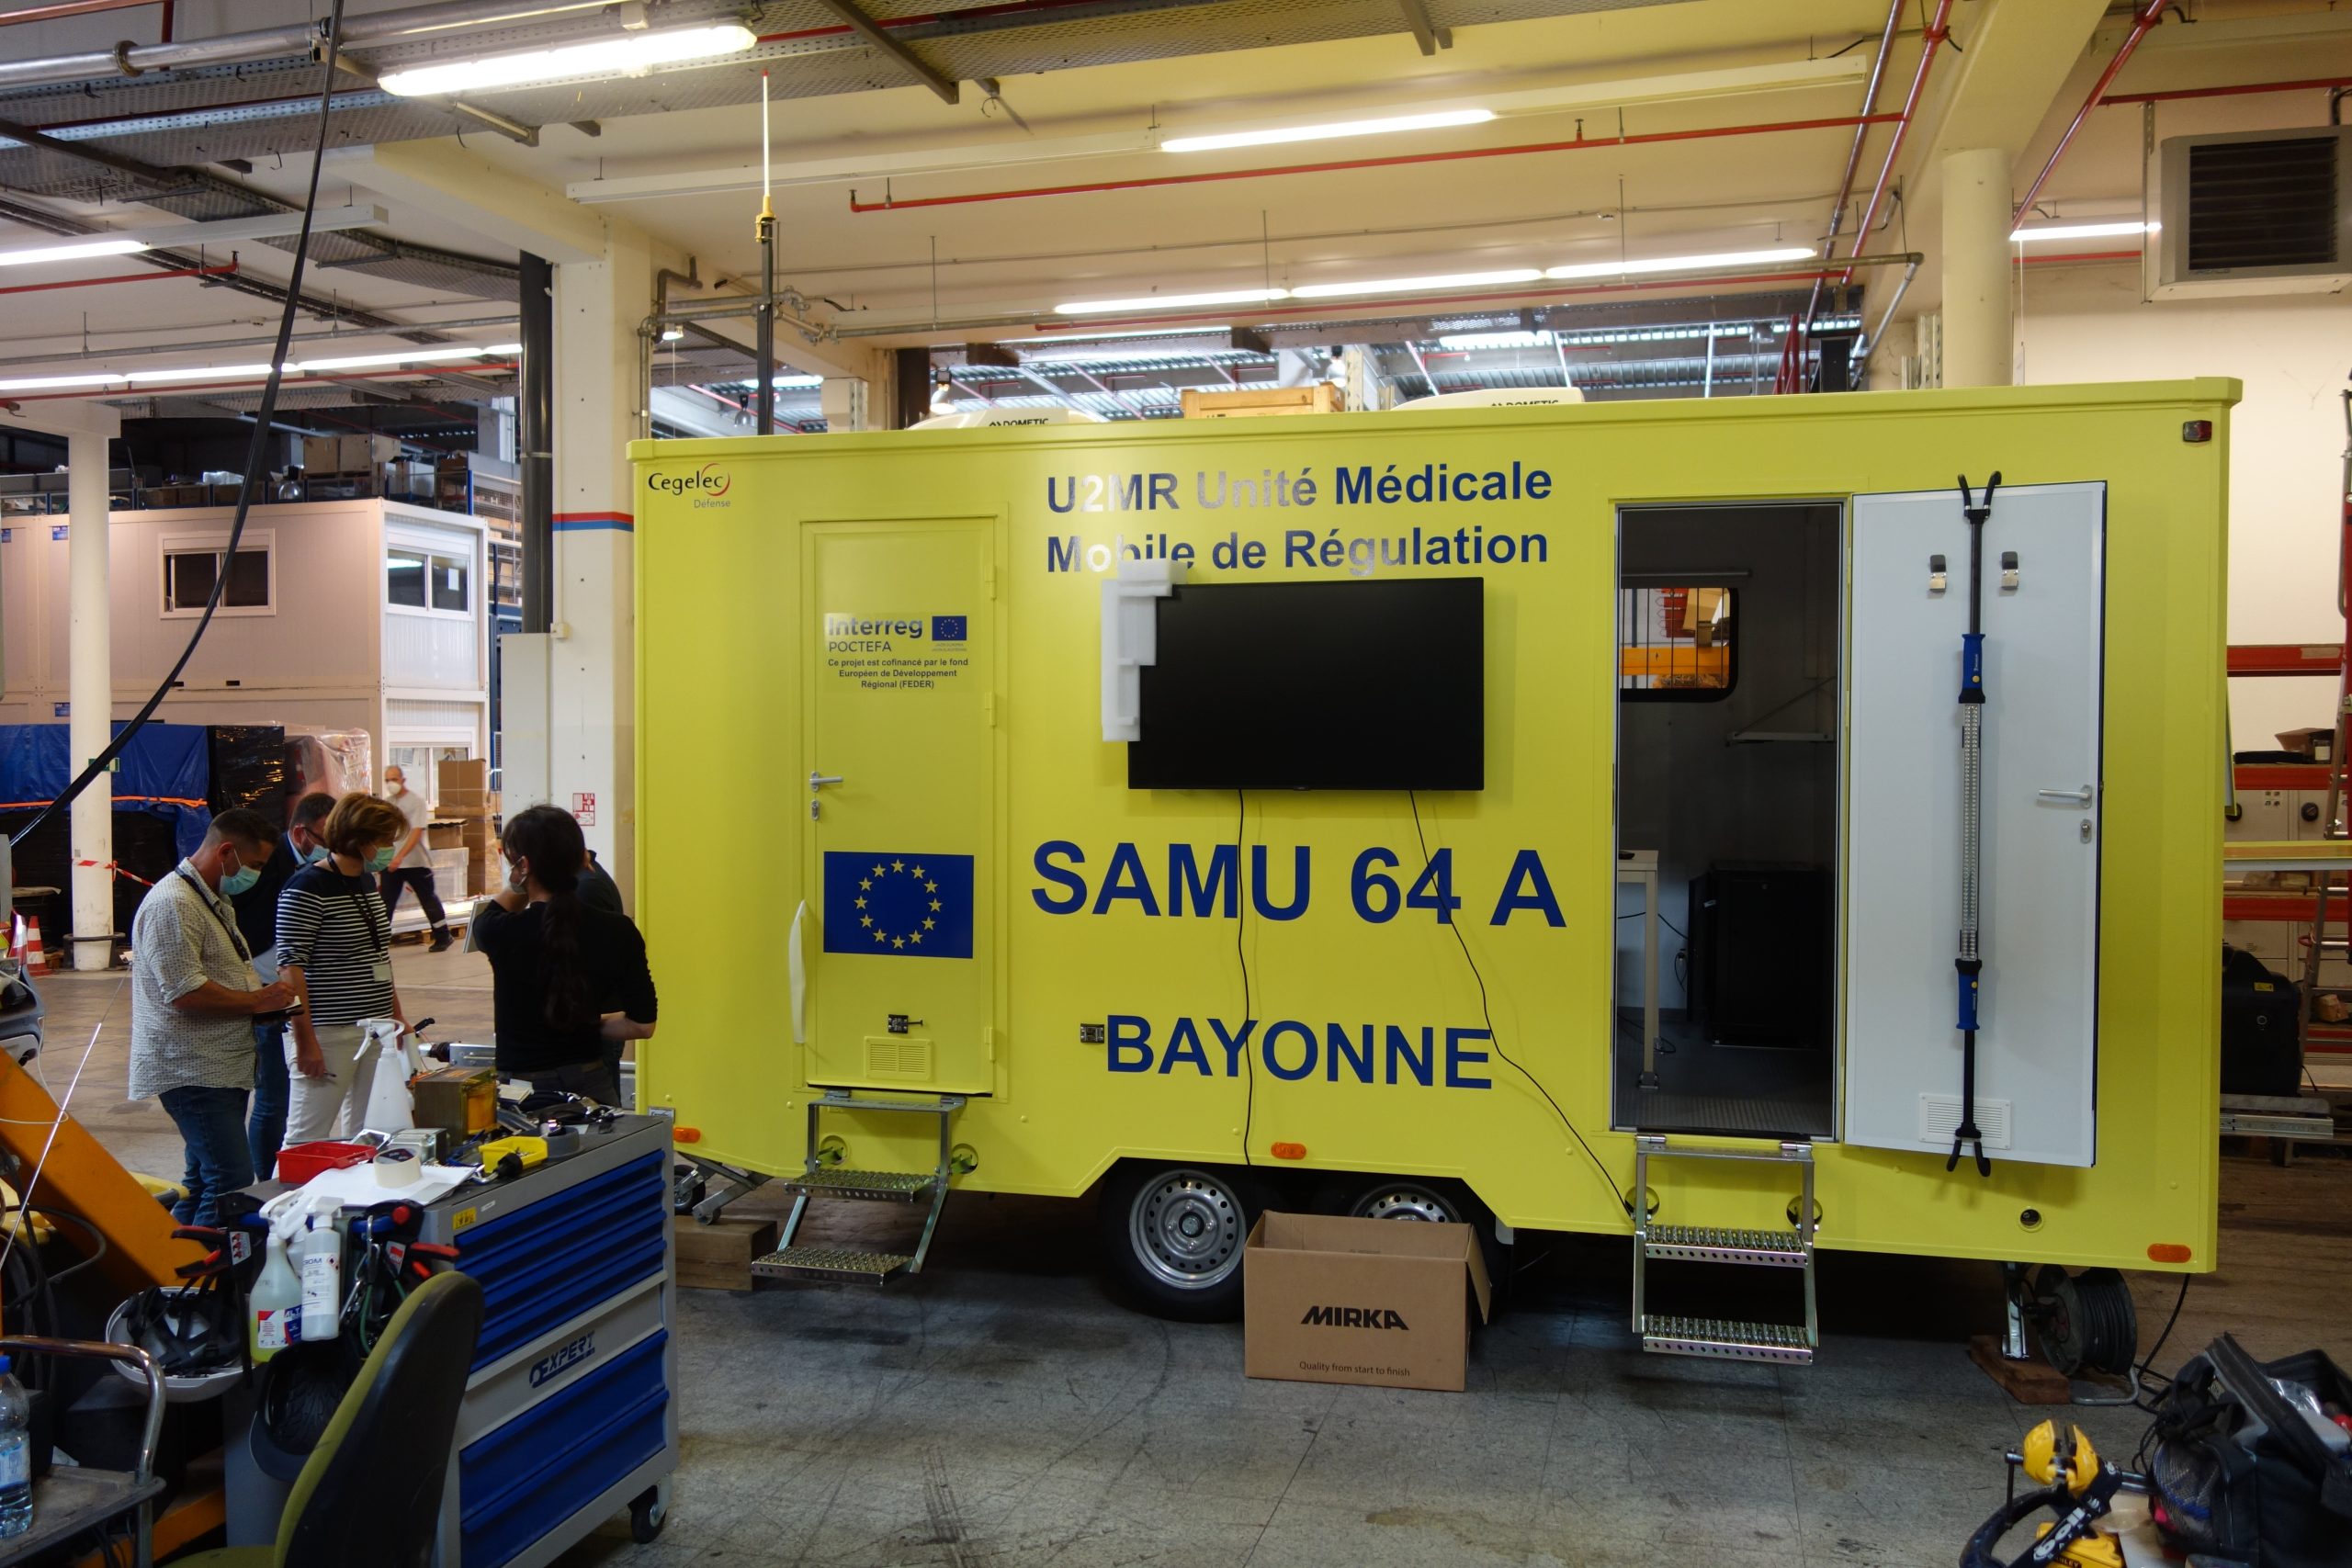 Mobile medical response unit provides coordinated on-site emergency and disaster healthcare